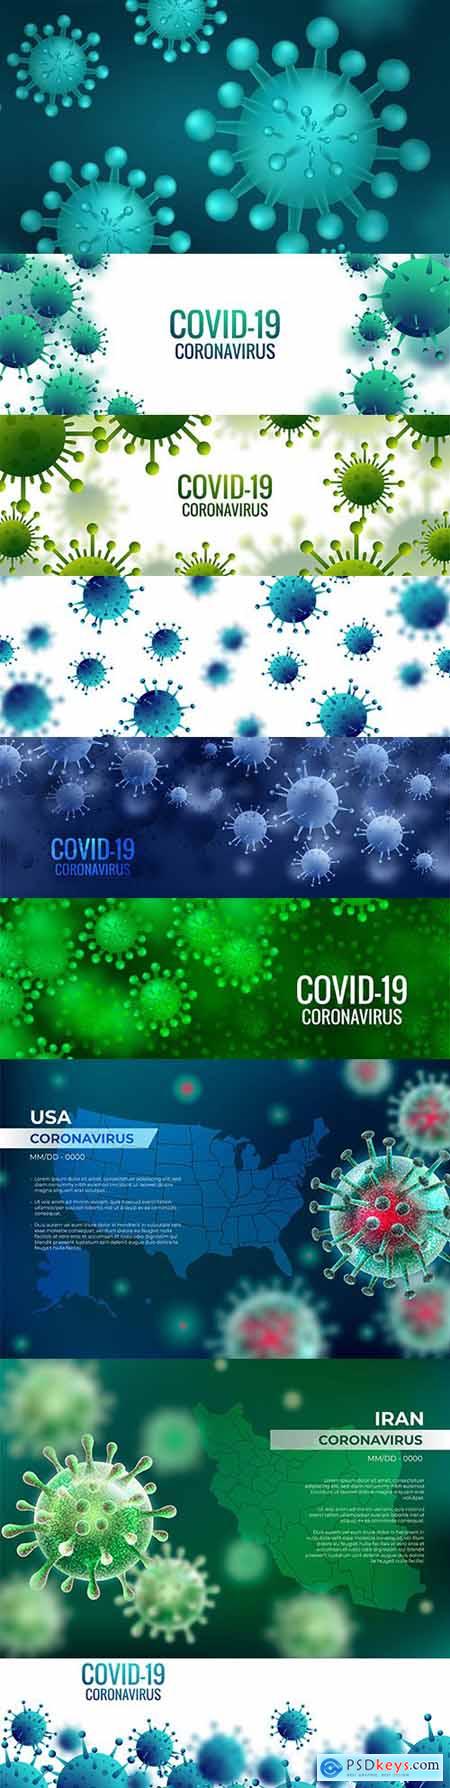 Coronavirus cell banner and realistic background with map